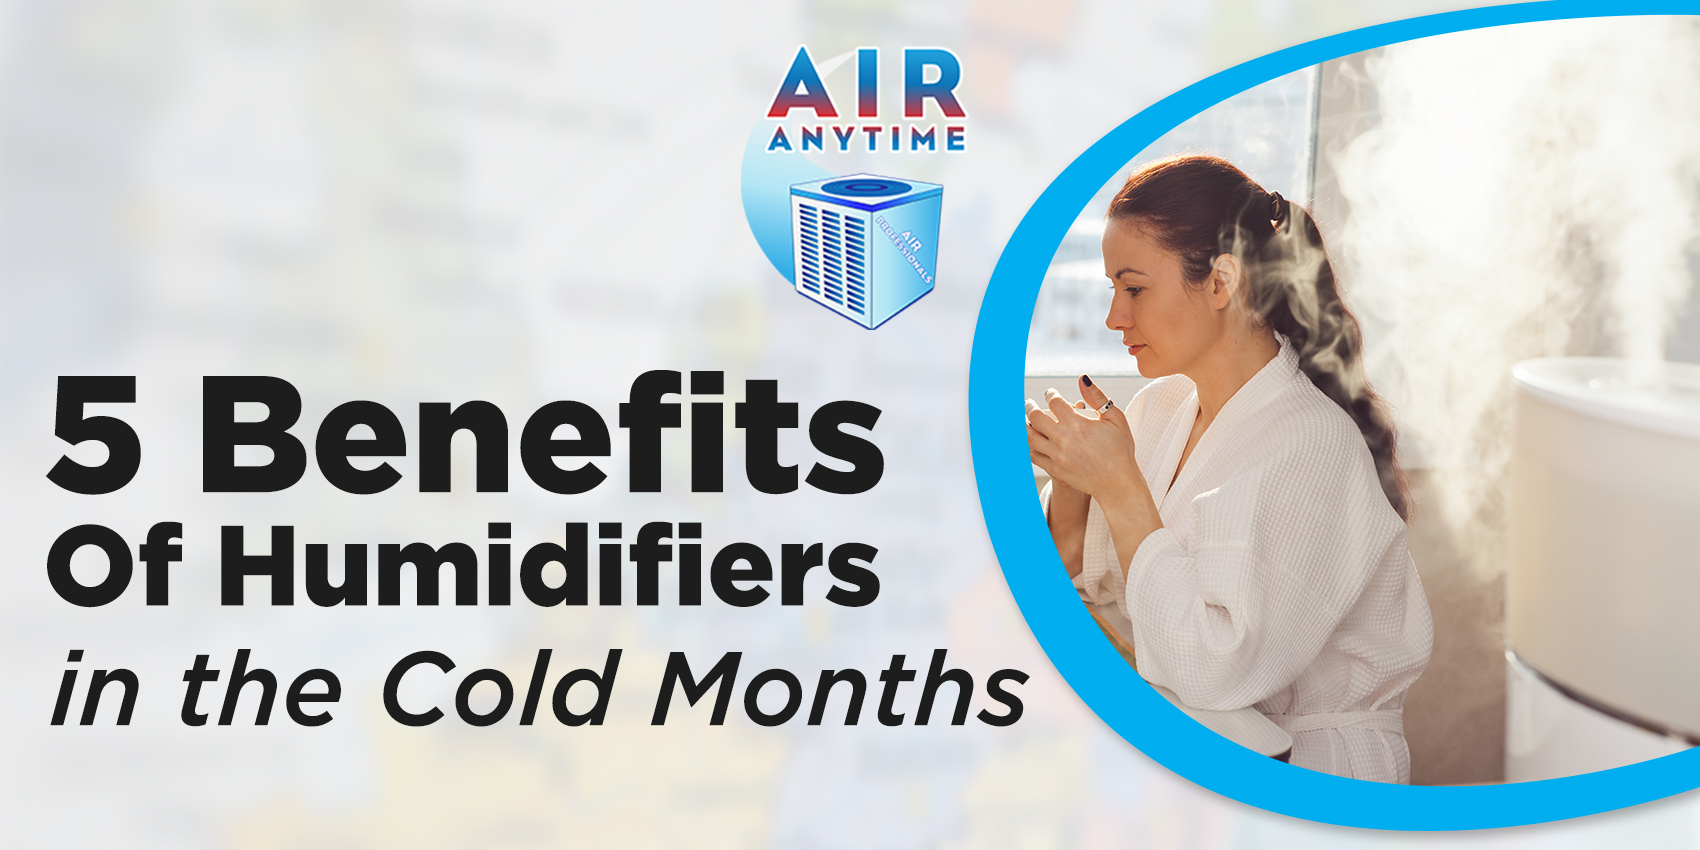 5 Benefits of Humidifiers in the Cold Months